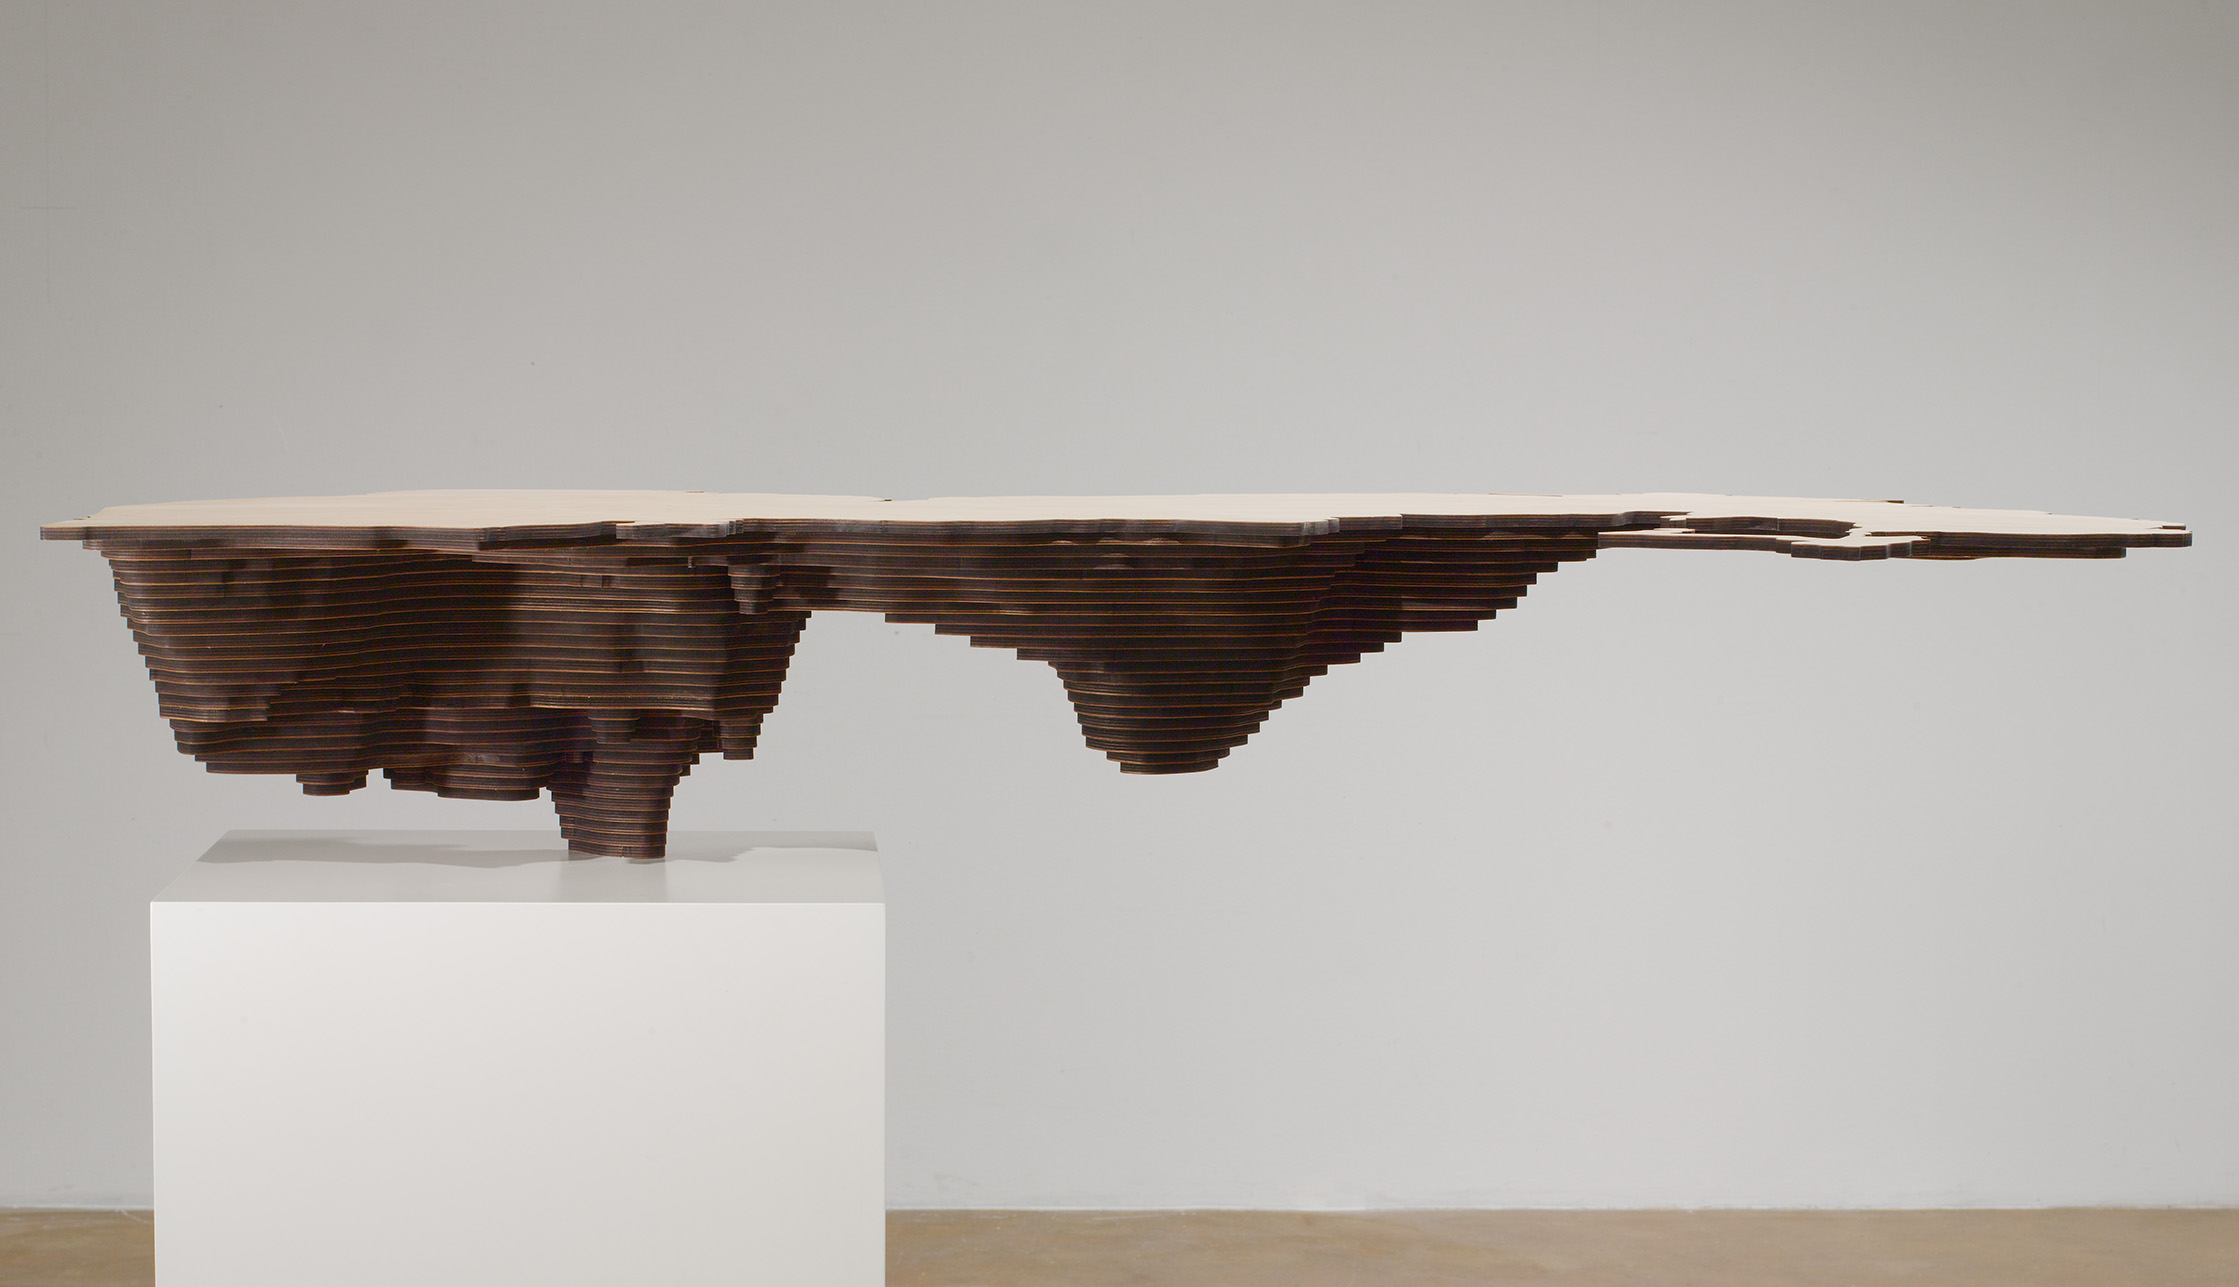 Side view of piece of wood, flat on top with topographical carving of what look like mountains, mounted on a pedestal